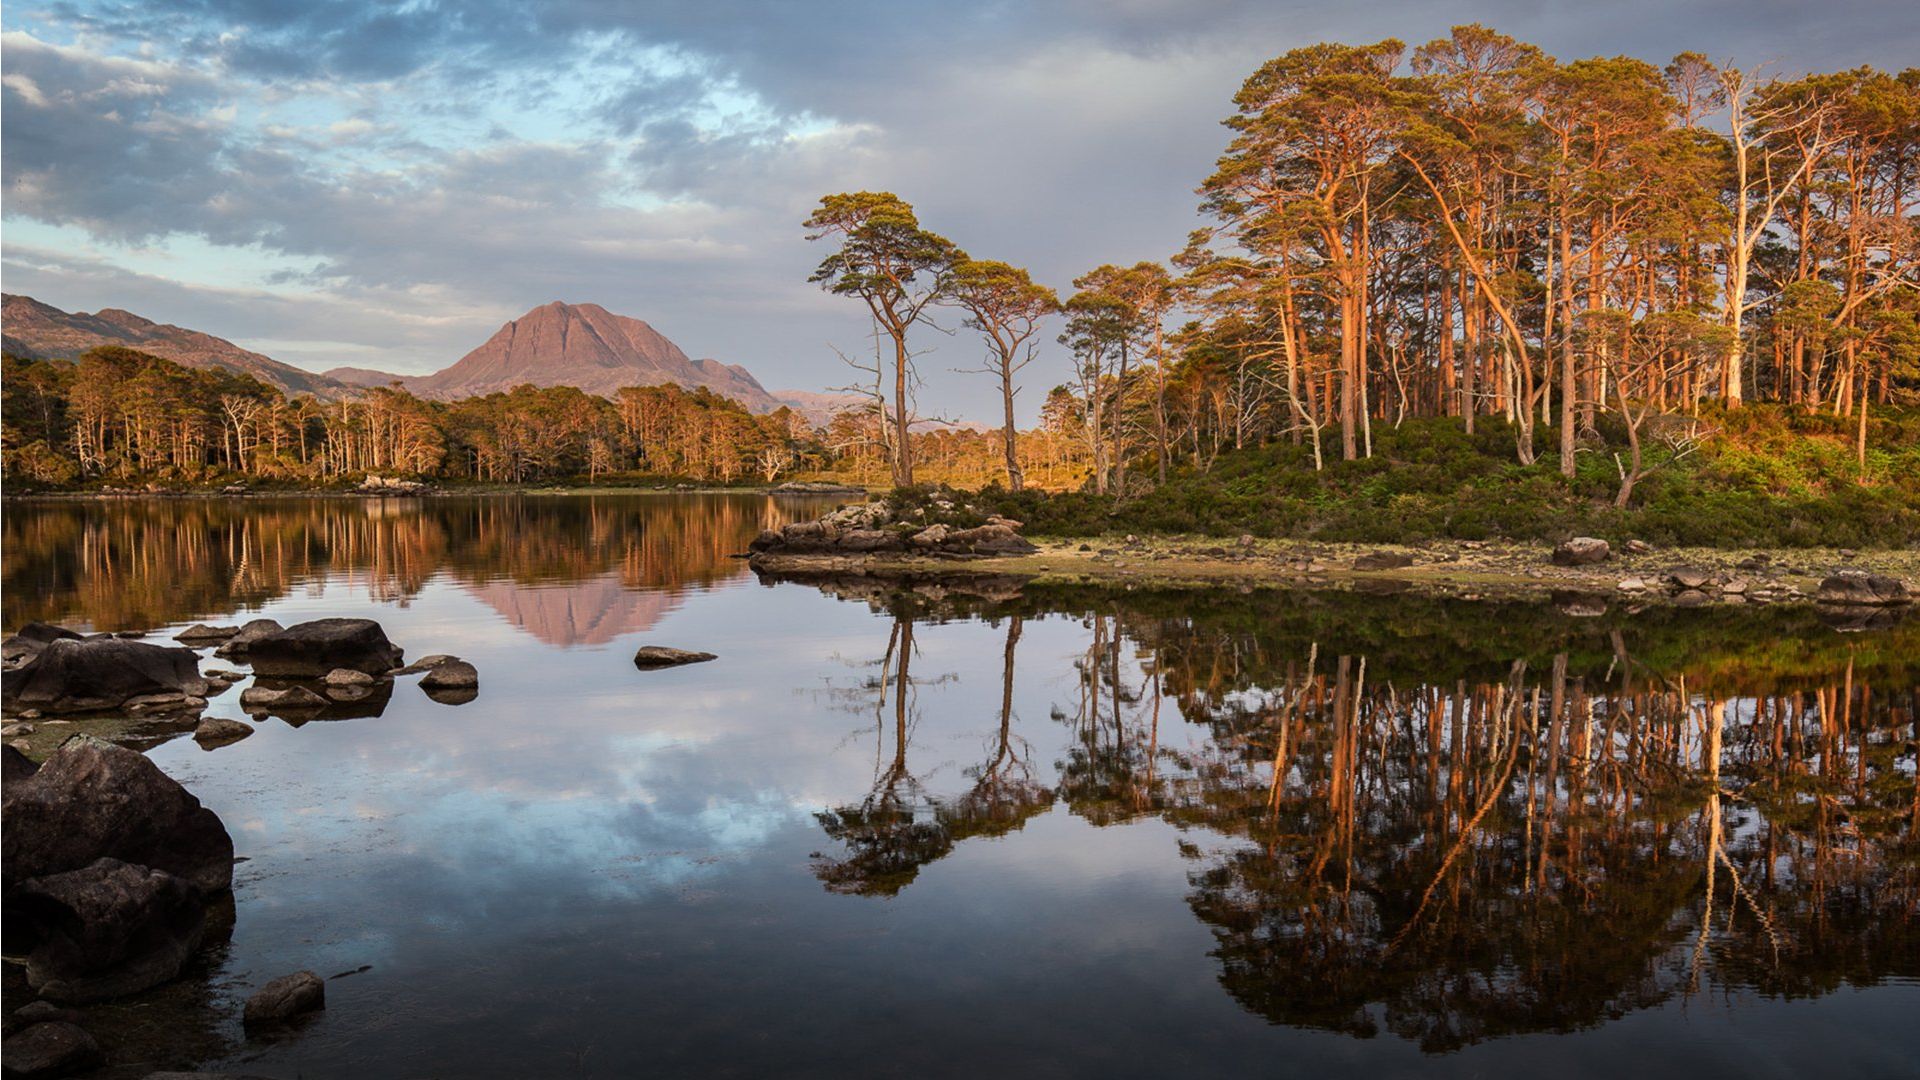 Trees reflect in a lake in Scotland with a mountain in the background